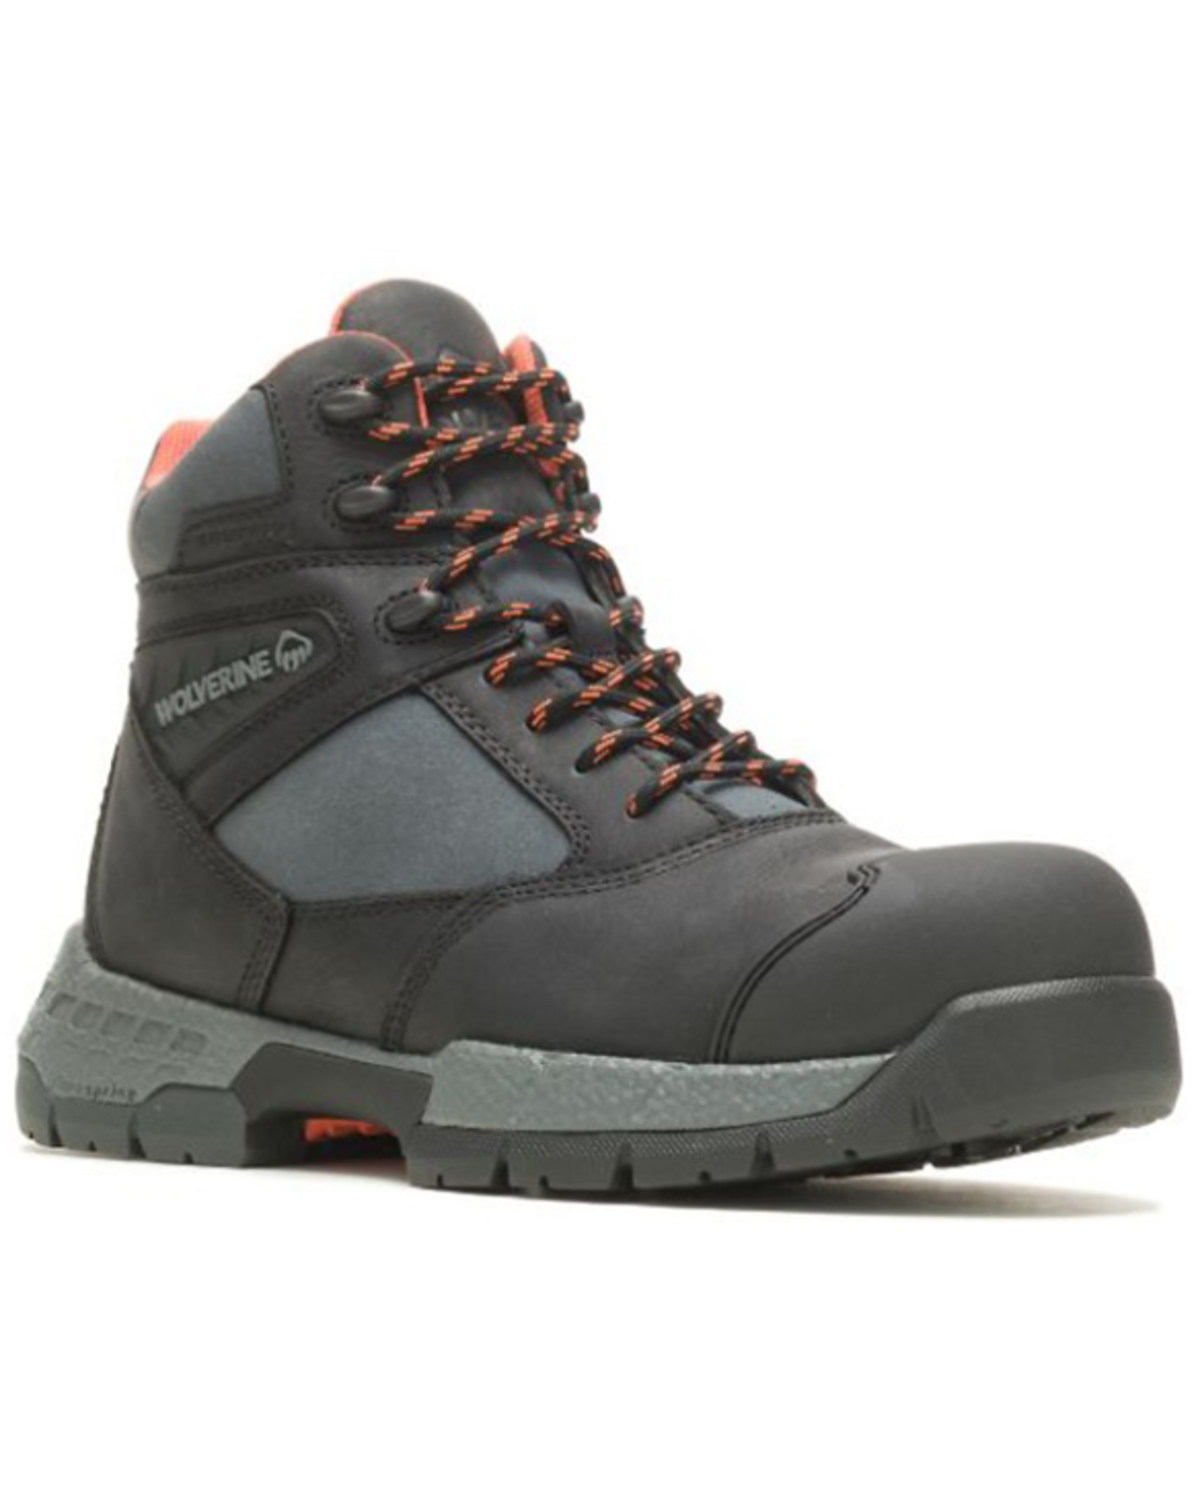 Wolverine Men's Rush Ultraspring™ 6" CarbonMAX Work Boots - Composite Toe